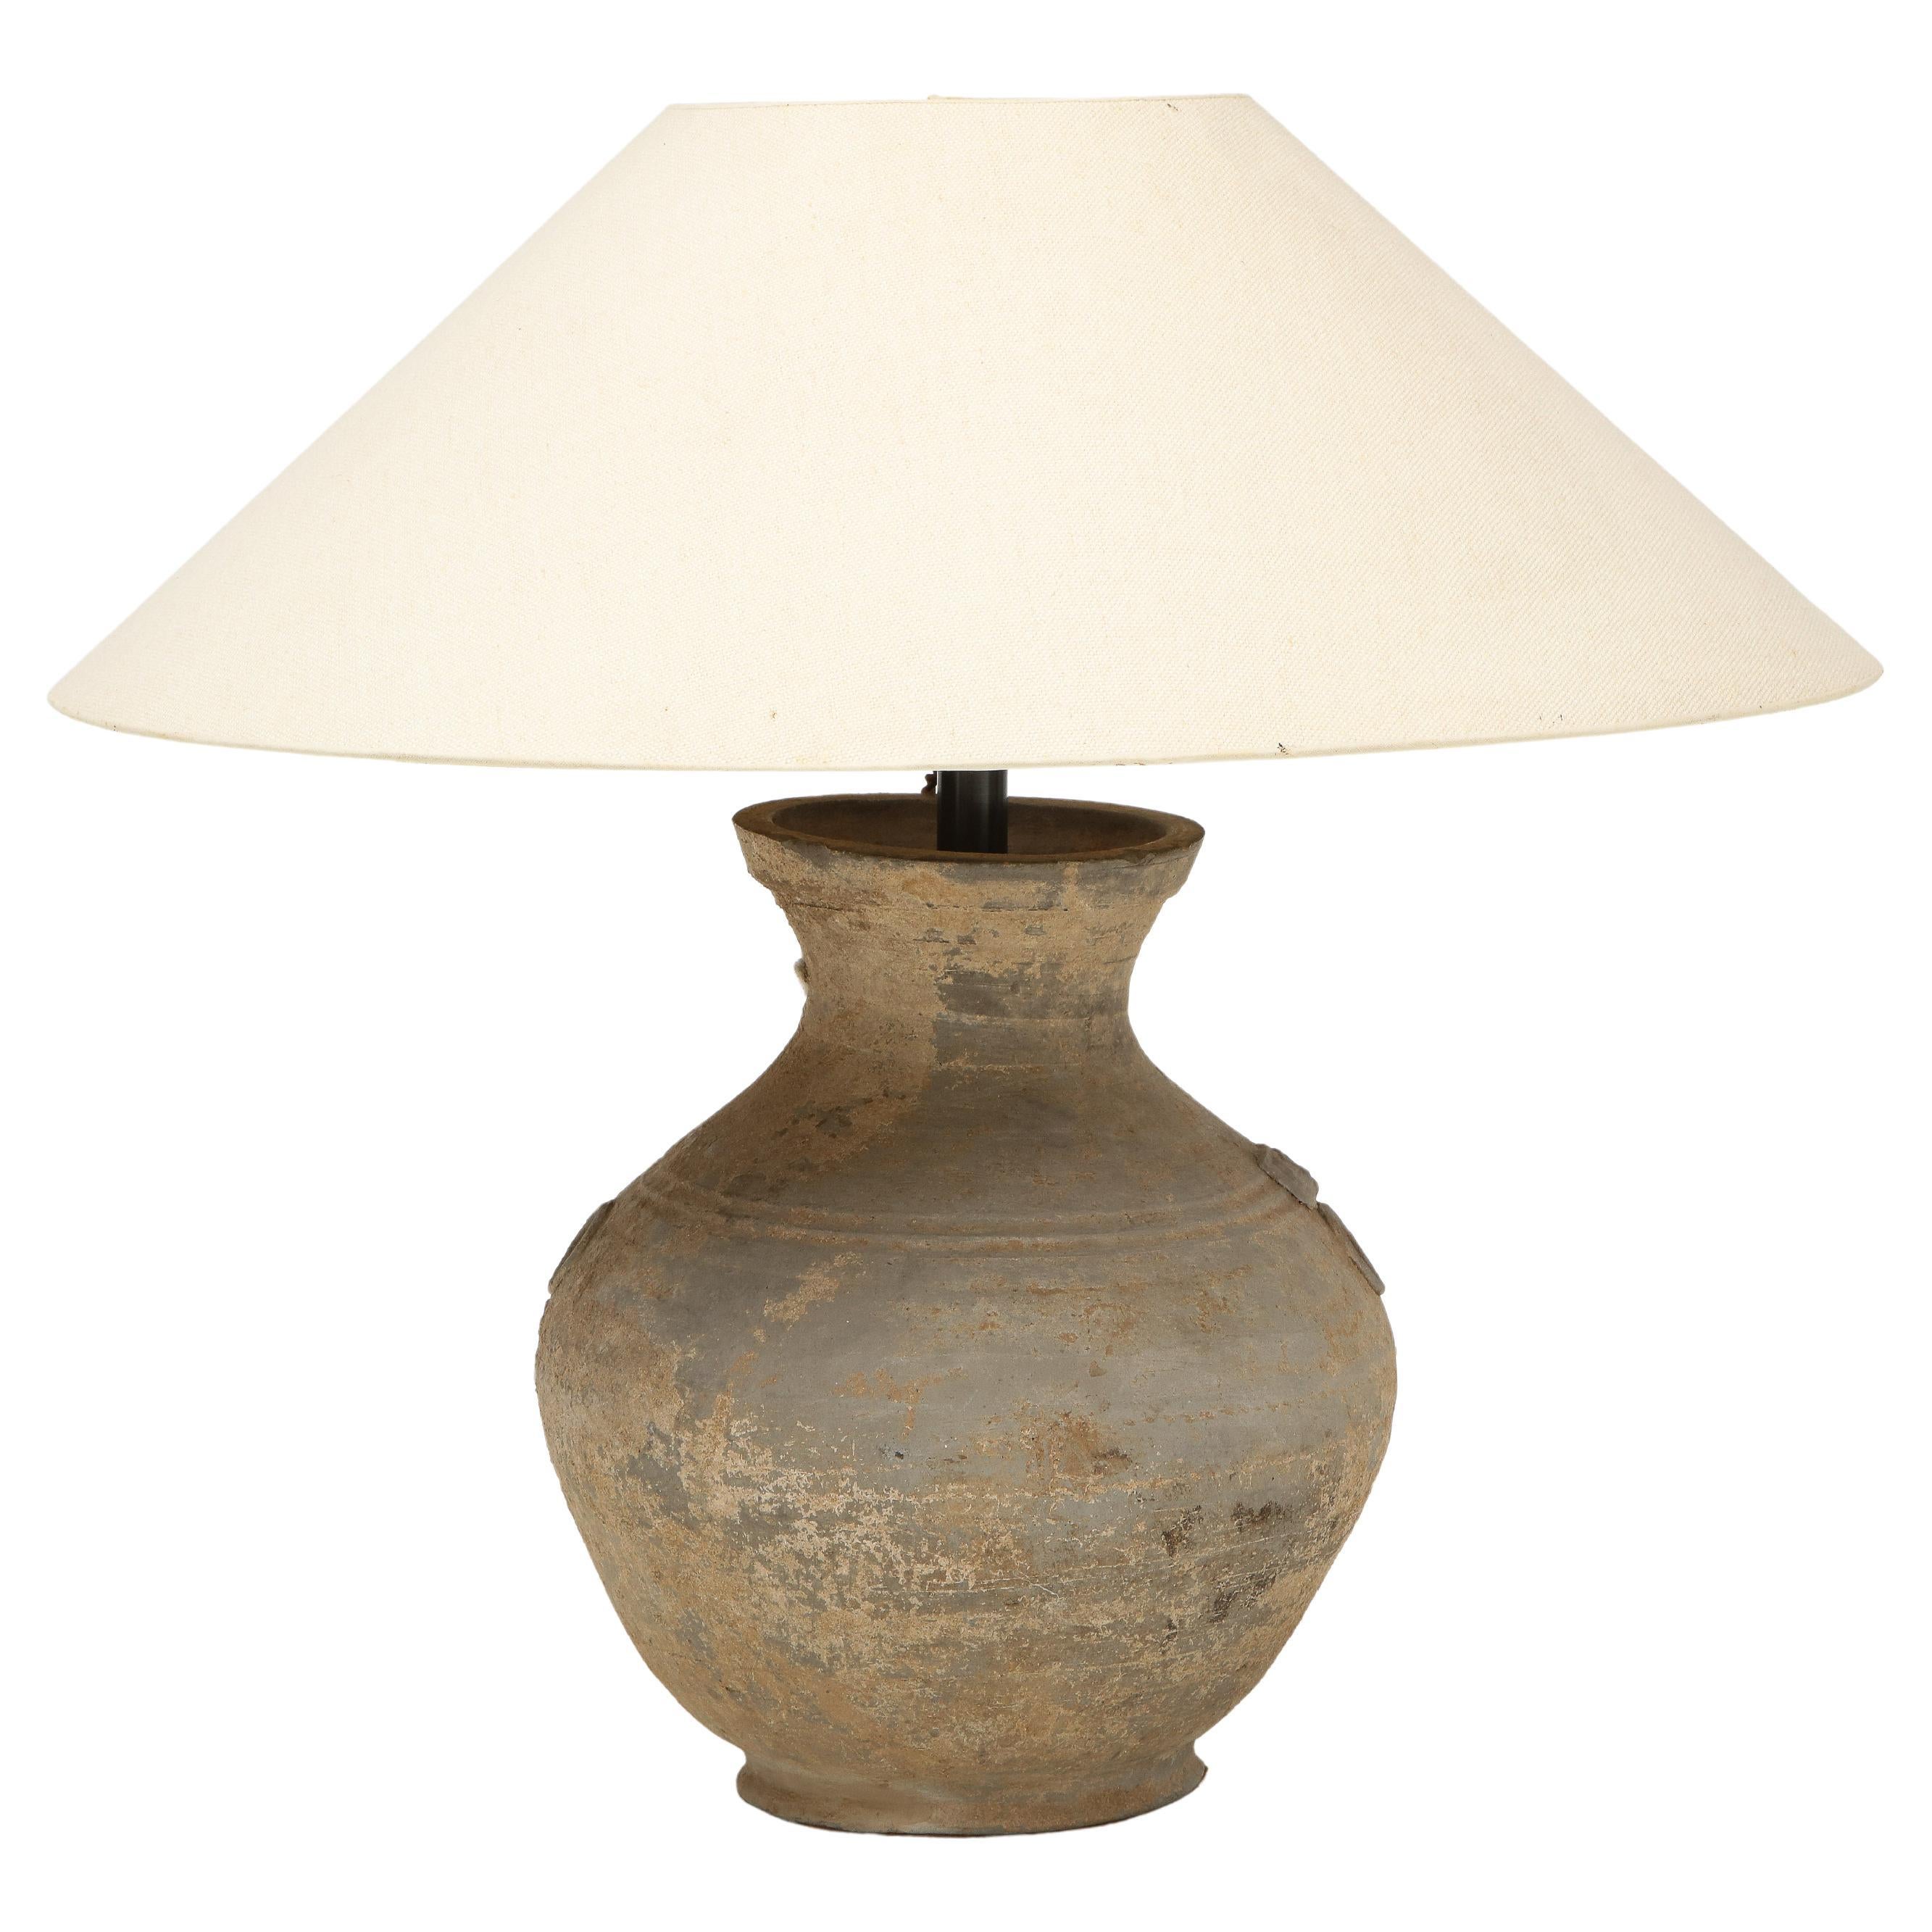 Large 'Han Dynasty’ Vessel Lamp, China with Belgian Linen Shade